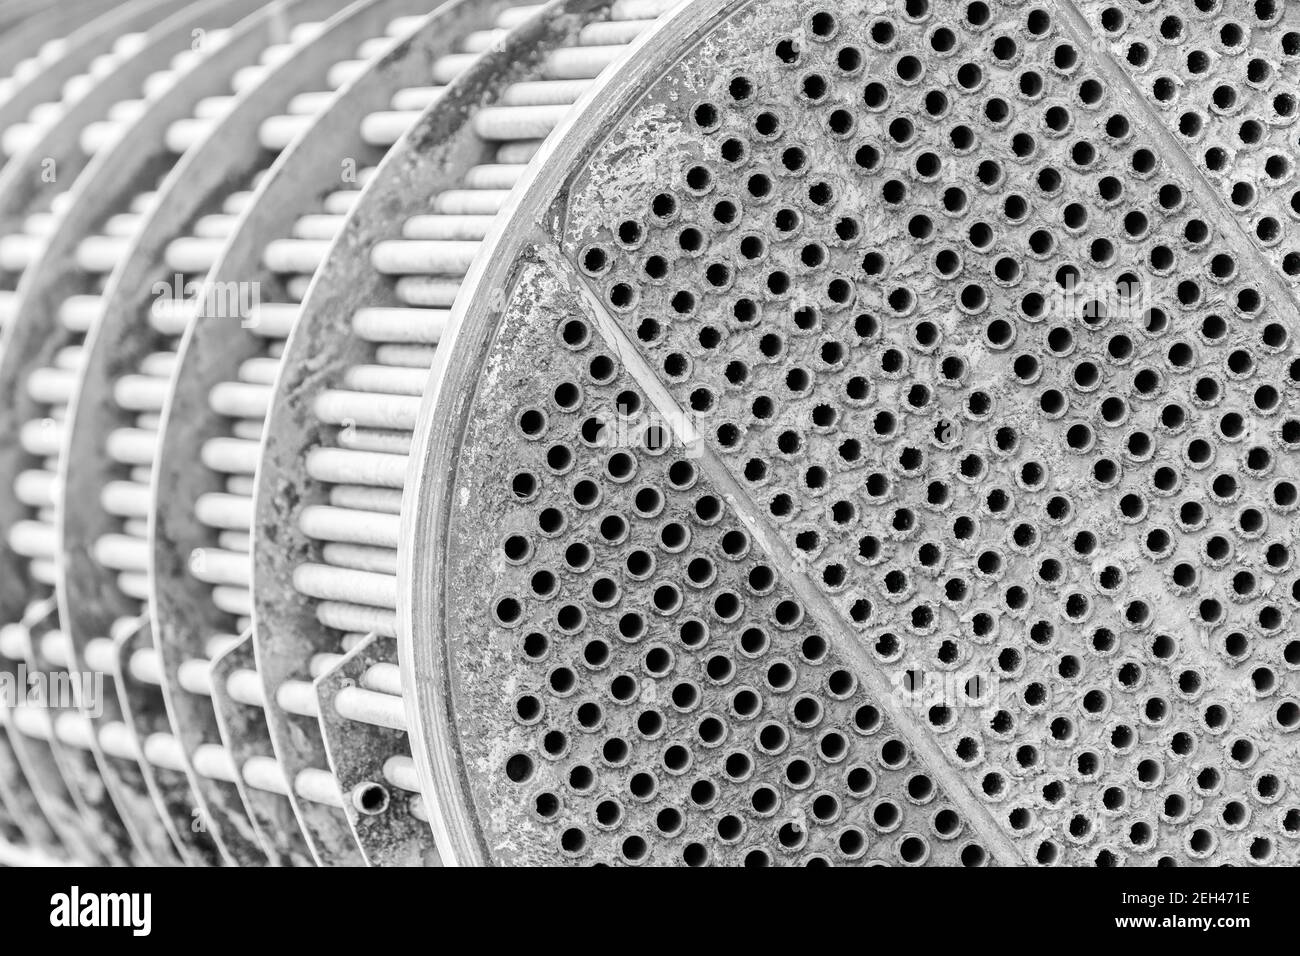 An industrial heat exchanger in black & white Stock Photo